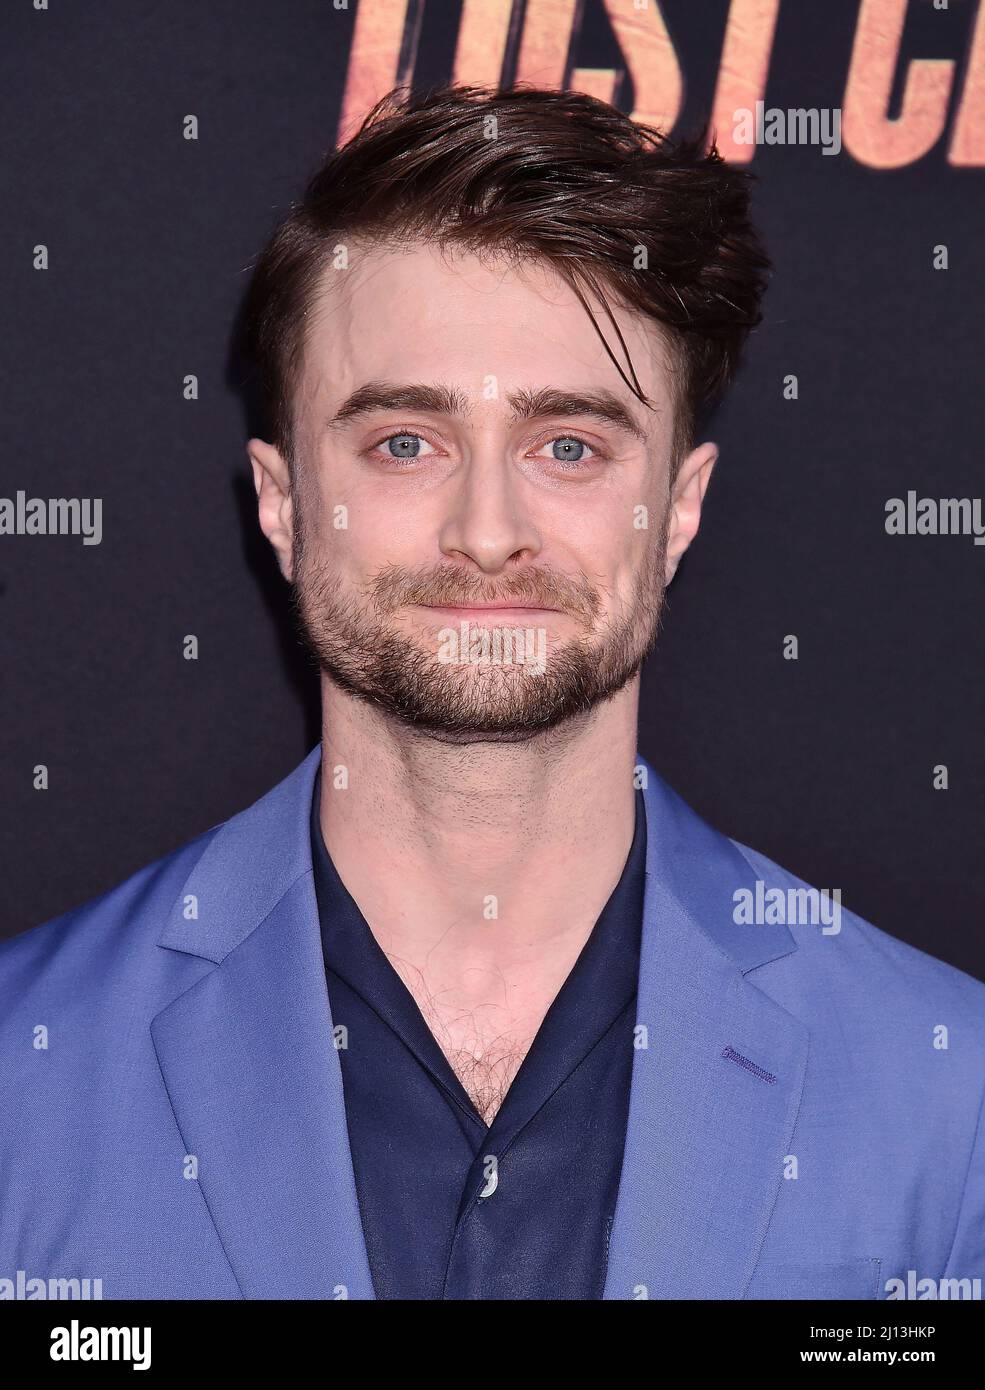 Los Angeles, Ca. 21st Mar, 2022. Daniel Radcliffe attends the Los Angeles premiere of Paramount Pictures' 'The Lost City' at Regency Village Theatre on March 21, 2022 in Los Angeles, California. Credit: Jeffrey Mayer/Jtm Photos/Media Punch/Alamy Live News Stock Photo